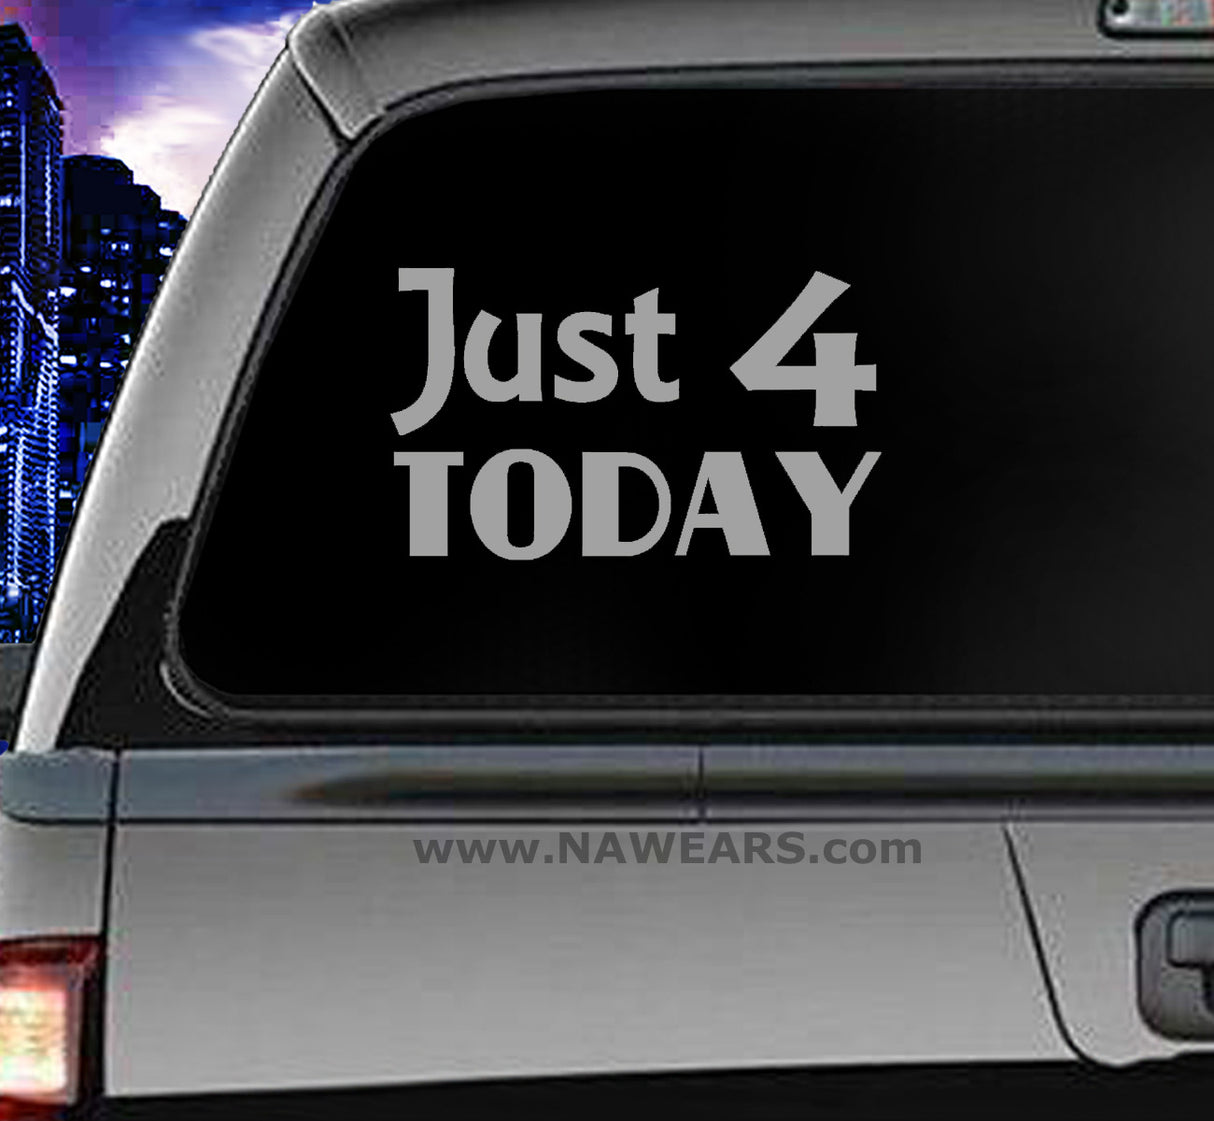 Win Decal- Just For Today